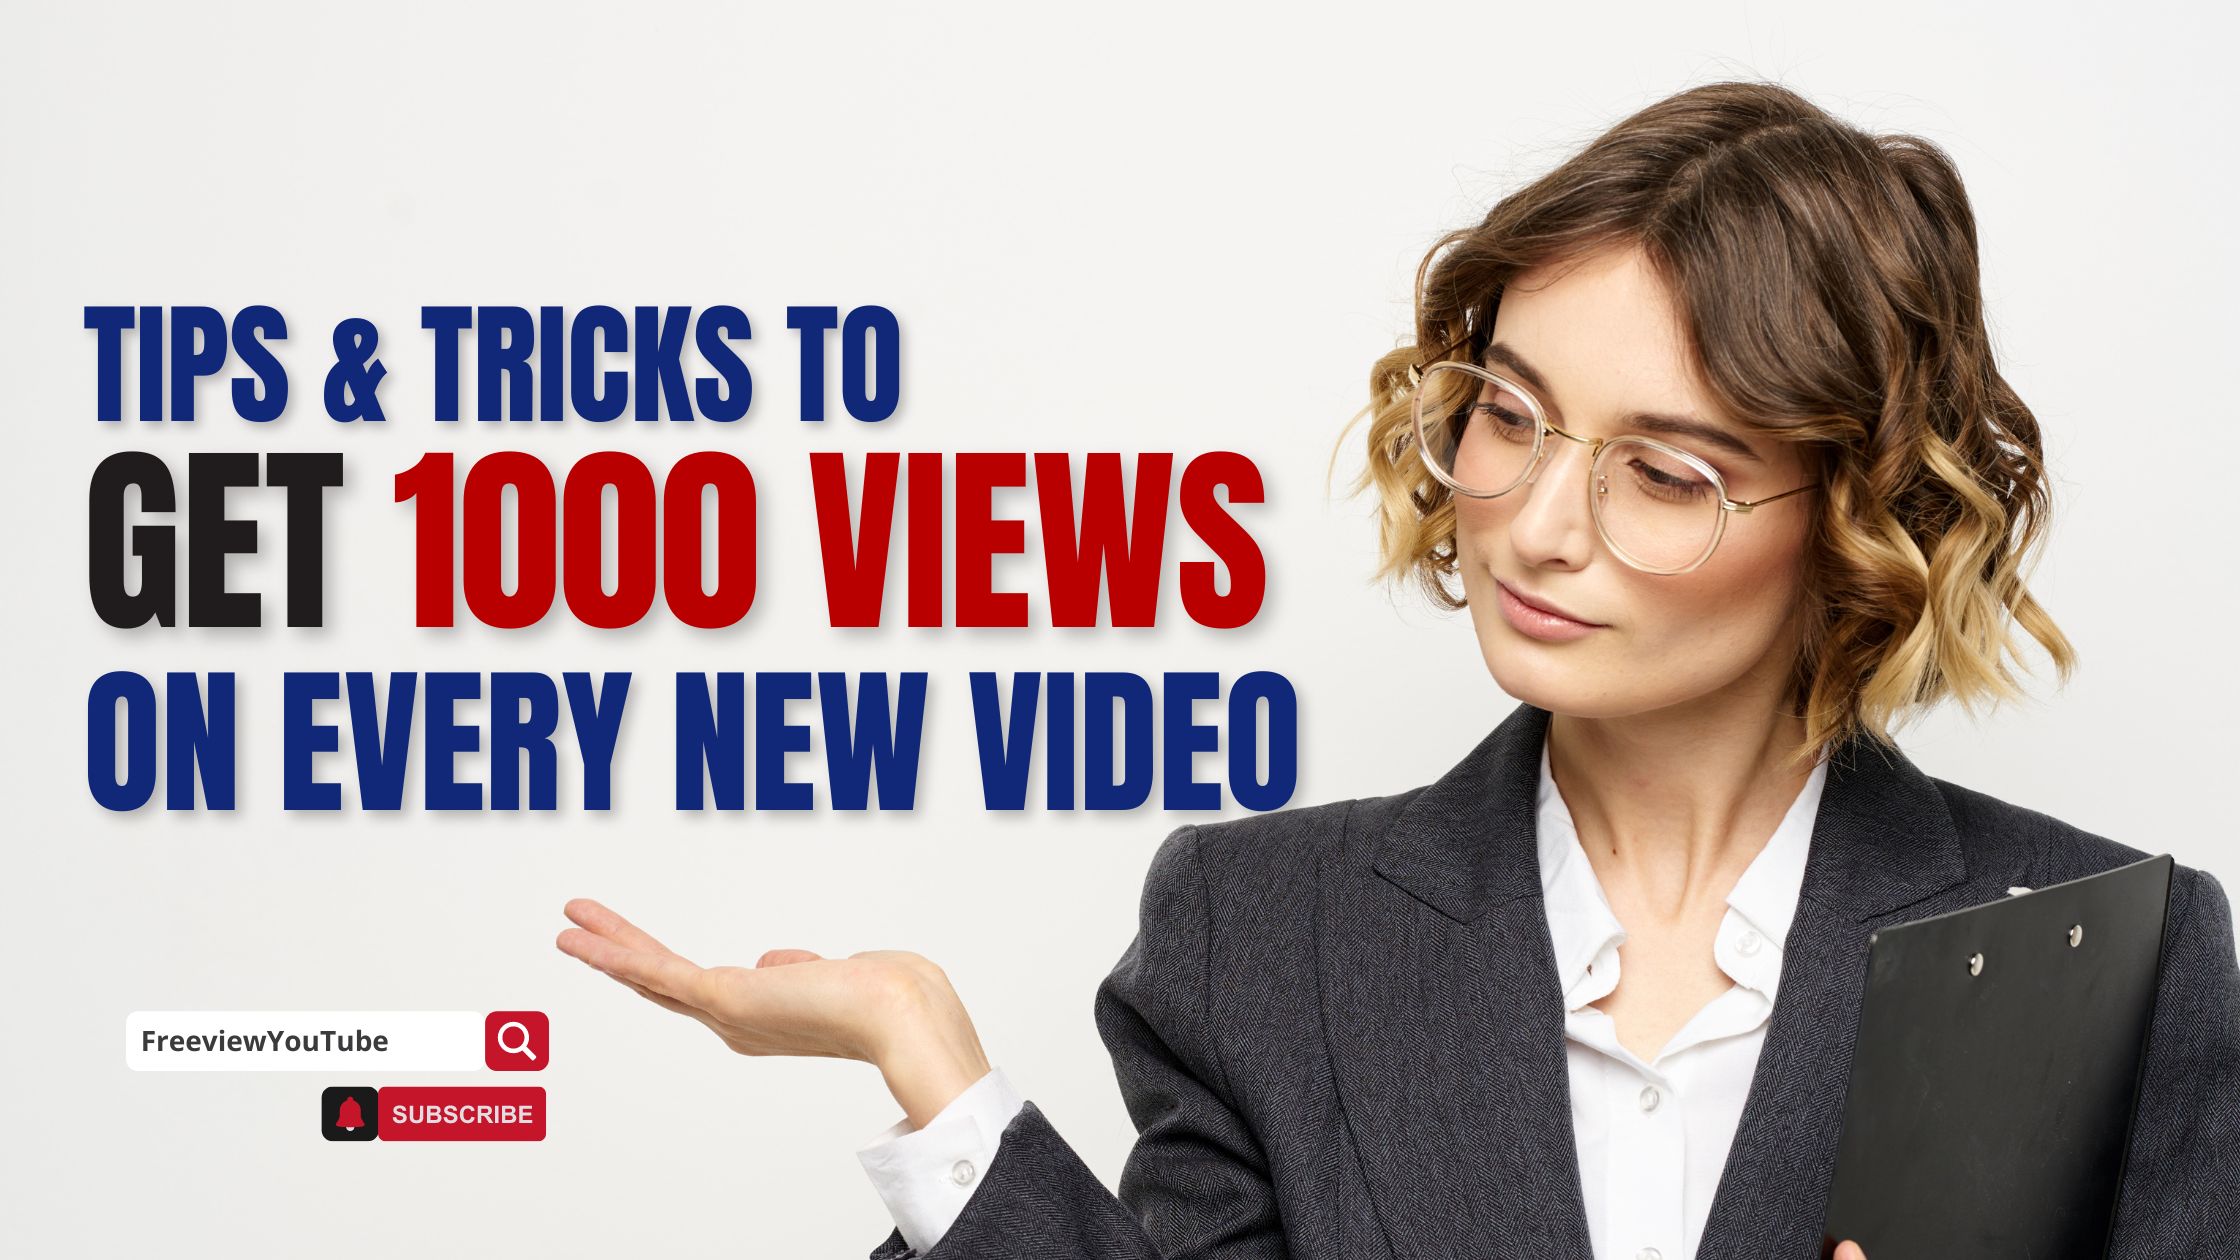 How To Get At Least 1000 Views On Every New Video? Tips & Tricks For New YouTubers.